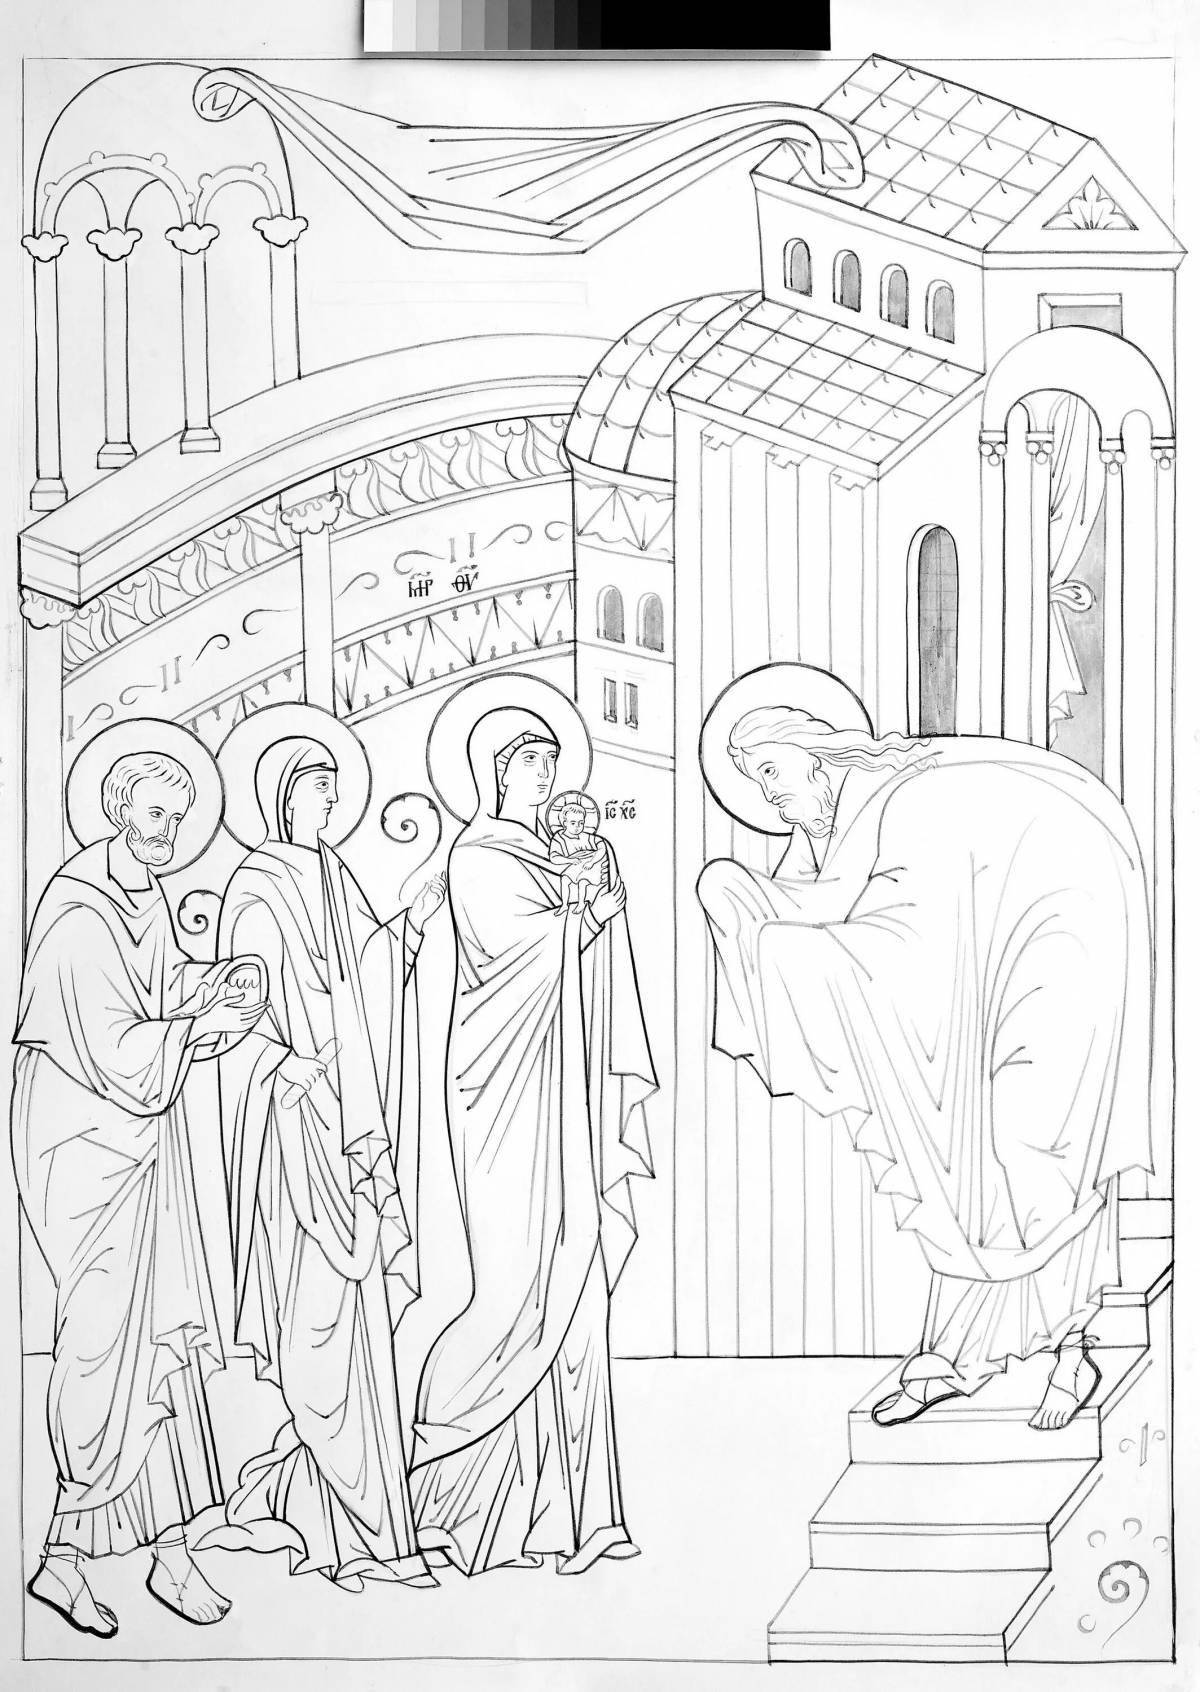 Coloring page joyful meeting of the Lord